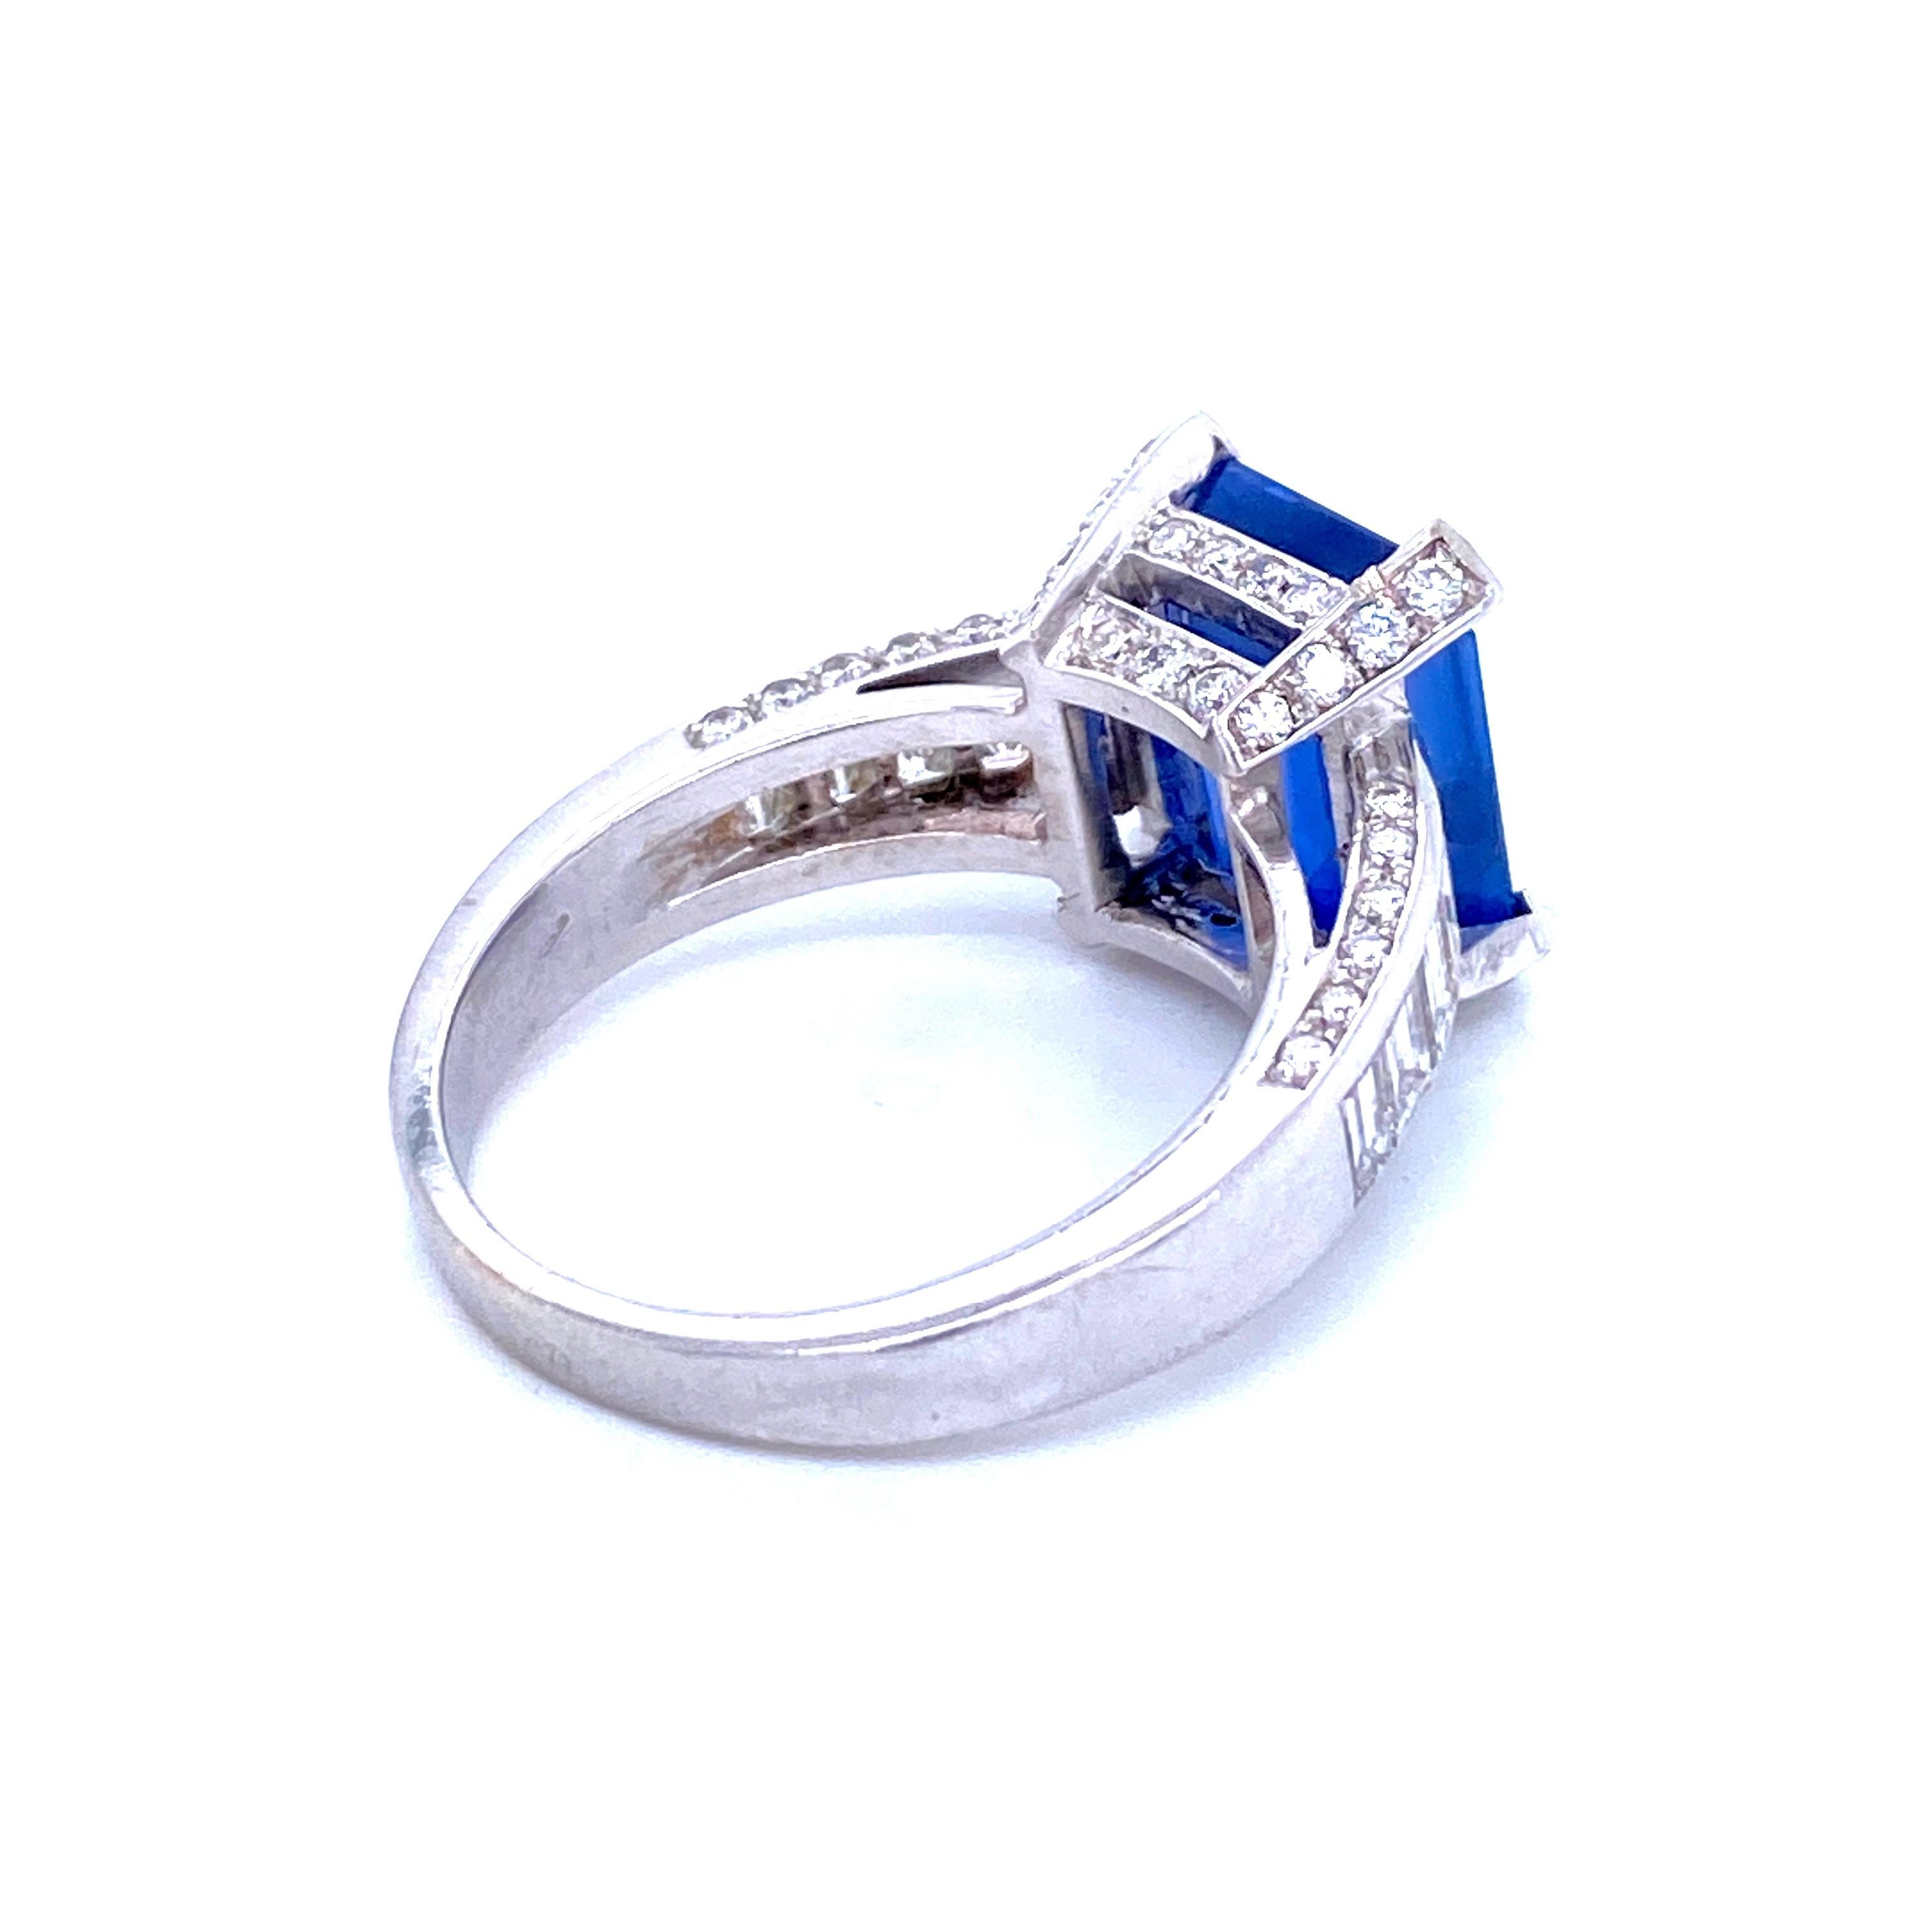 GIA Certified 6.59 Carat Sapphire Diamond Gold Ring For Sale 4